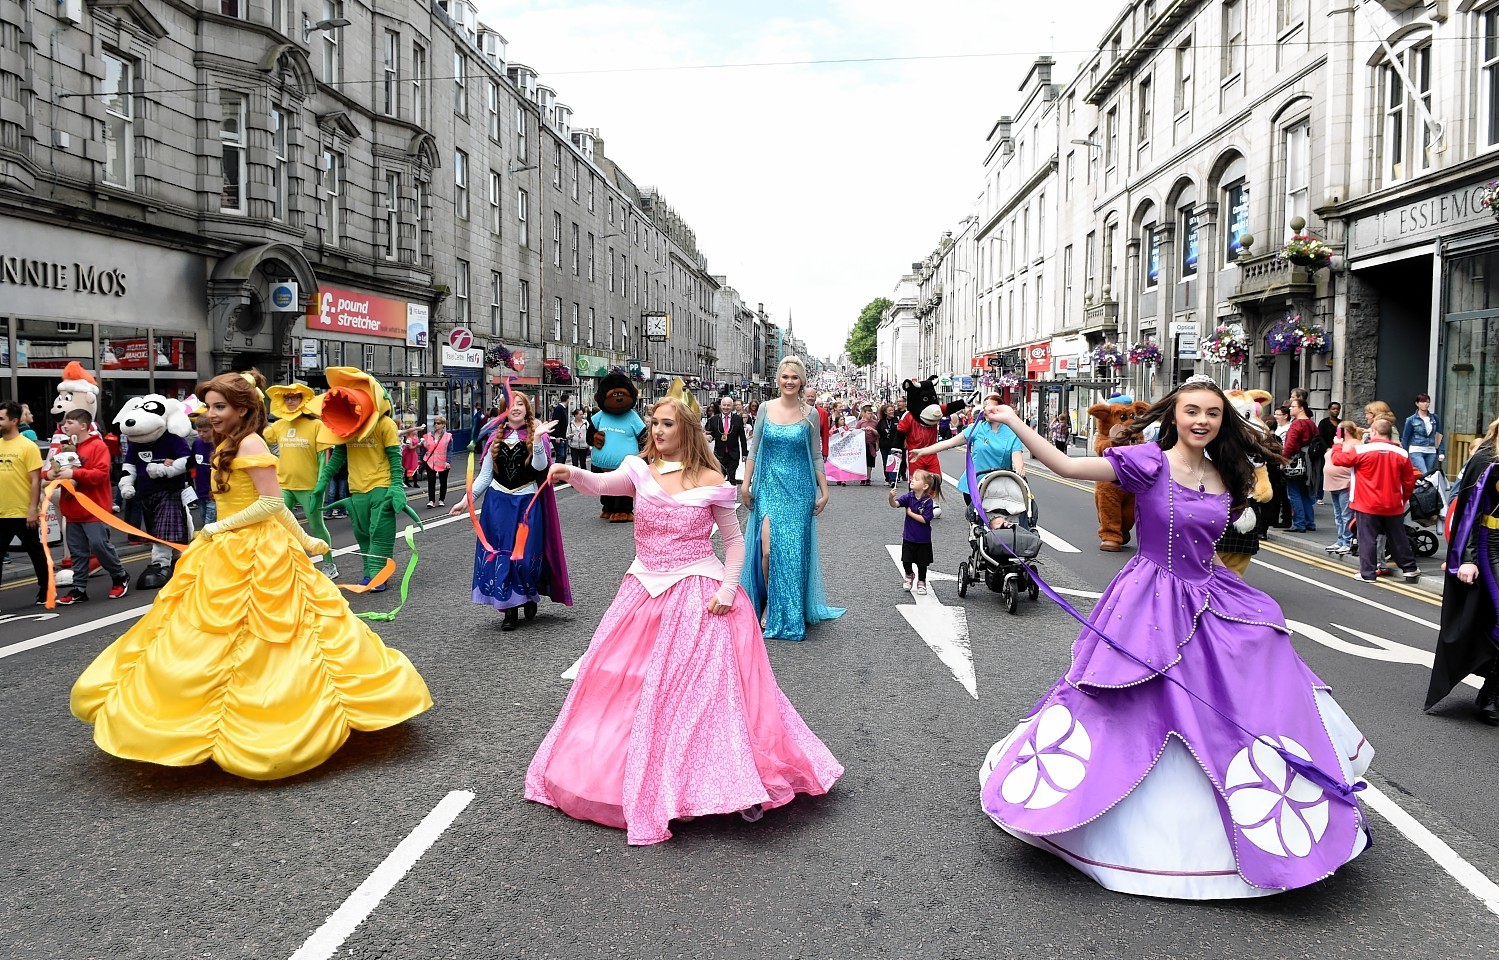 Thousands of people descend on Aberdeen for city festival Press and